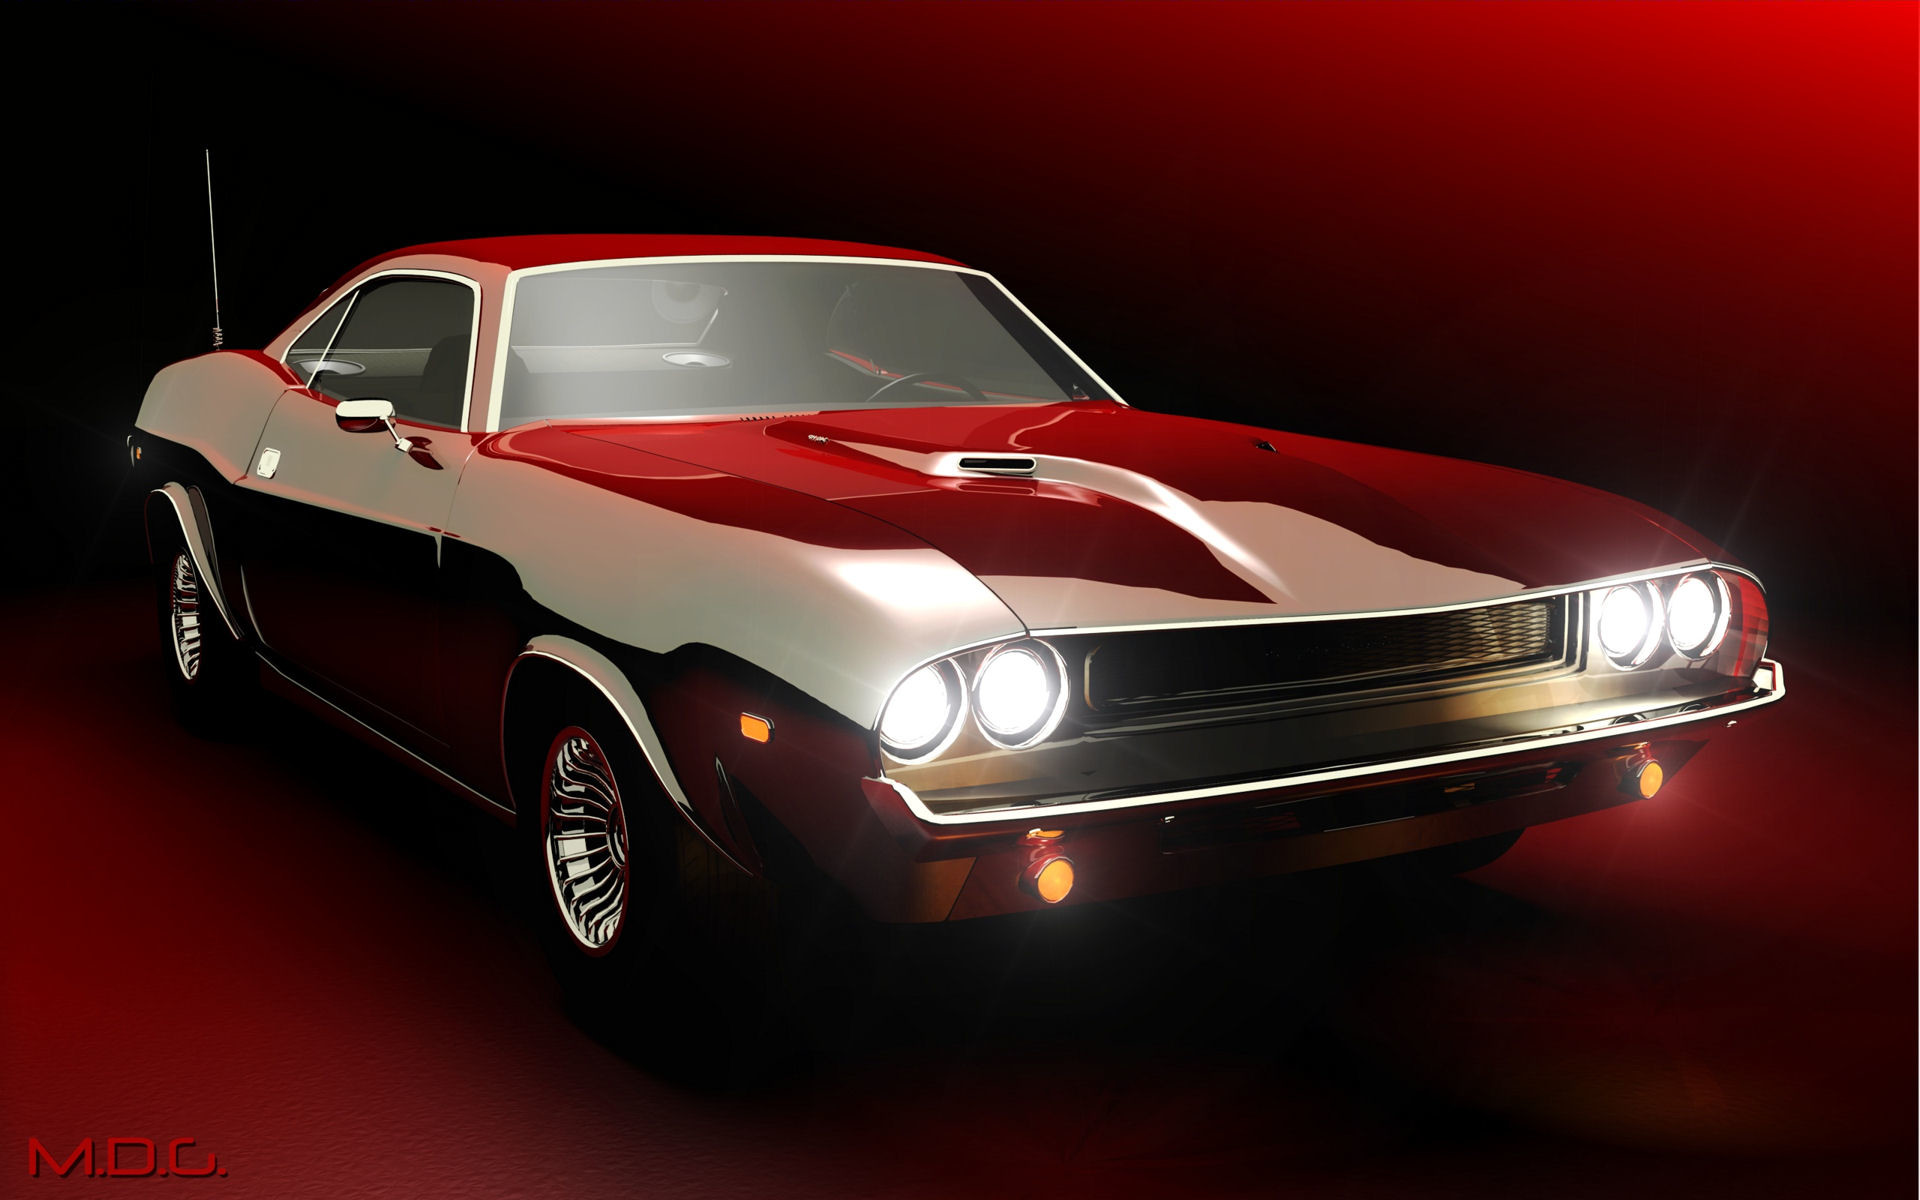 1920x1200 Muscle Car Wallpapers For Desktop 5381 Hd Wallpapers In Cars